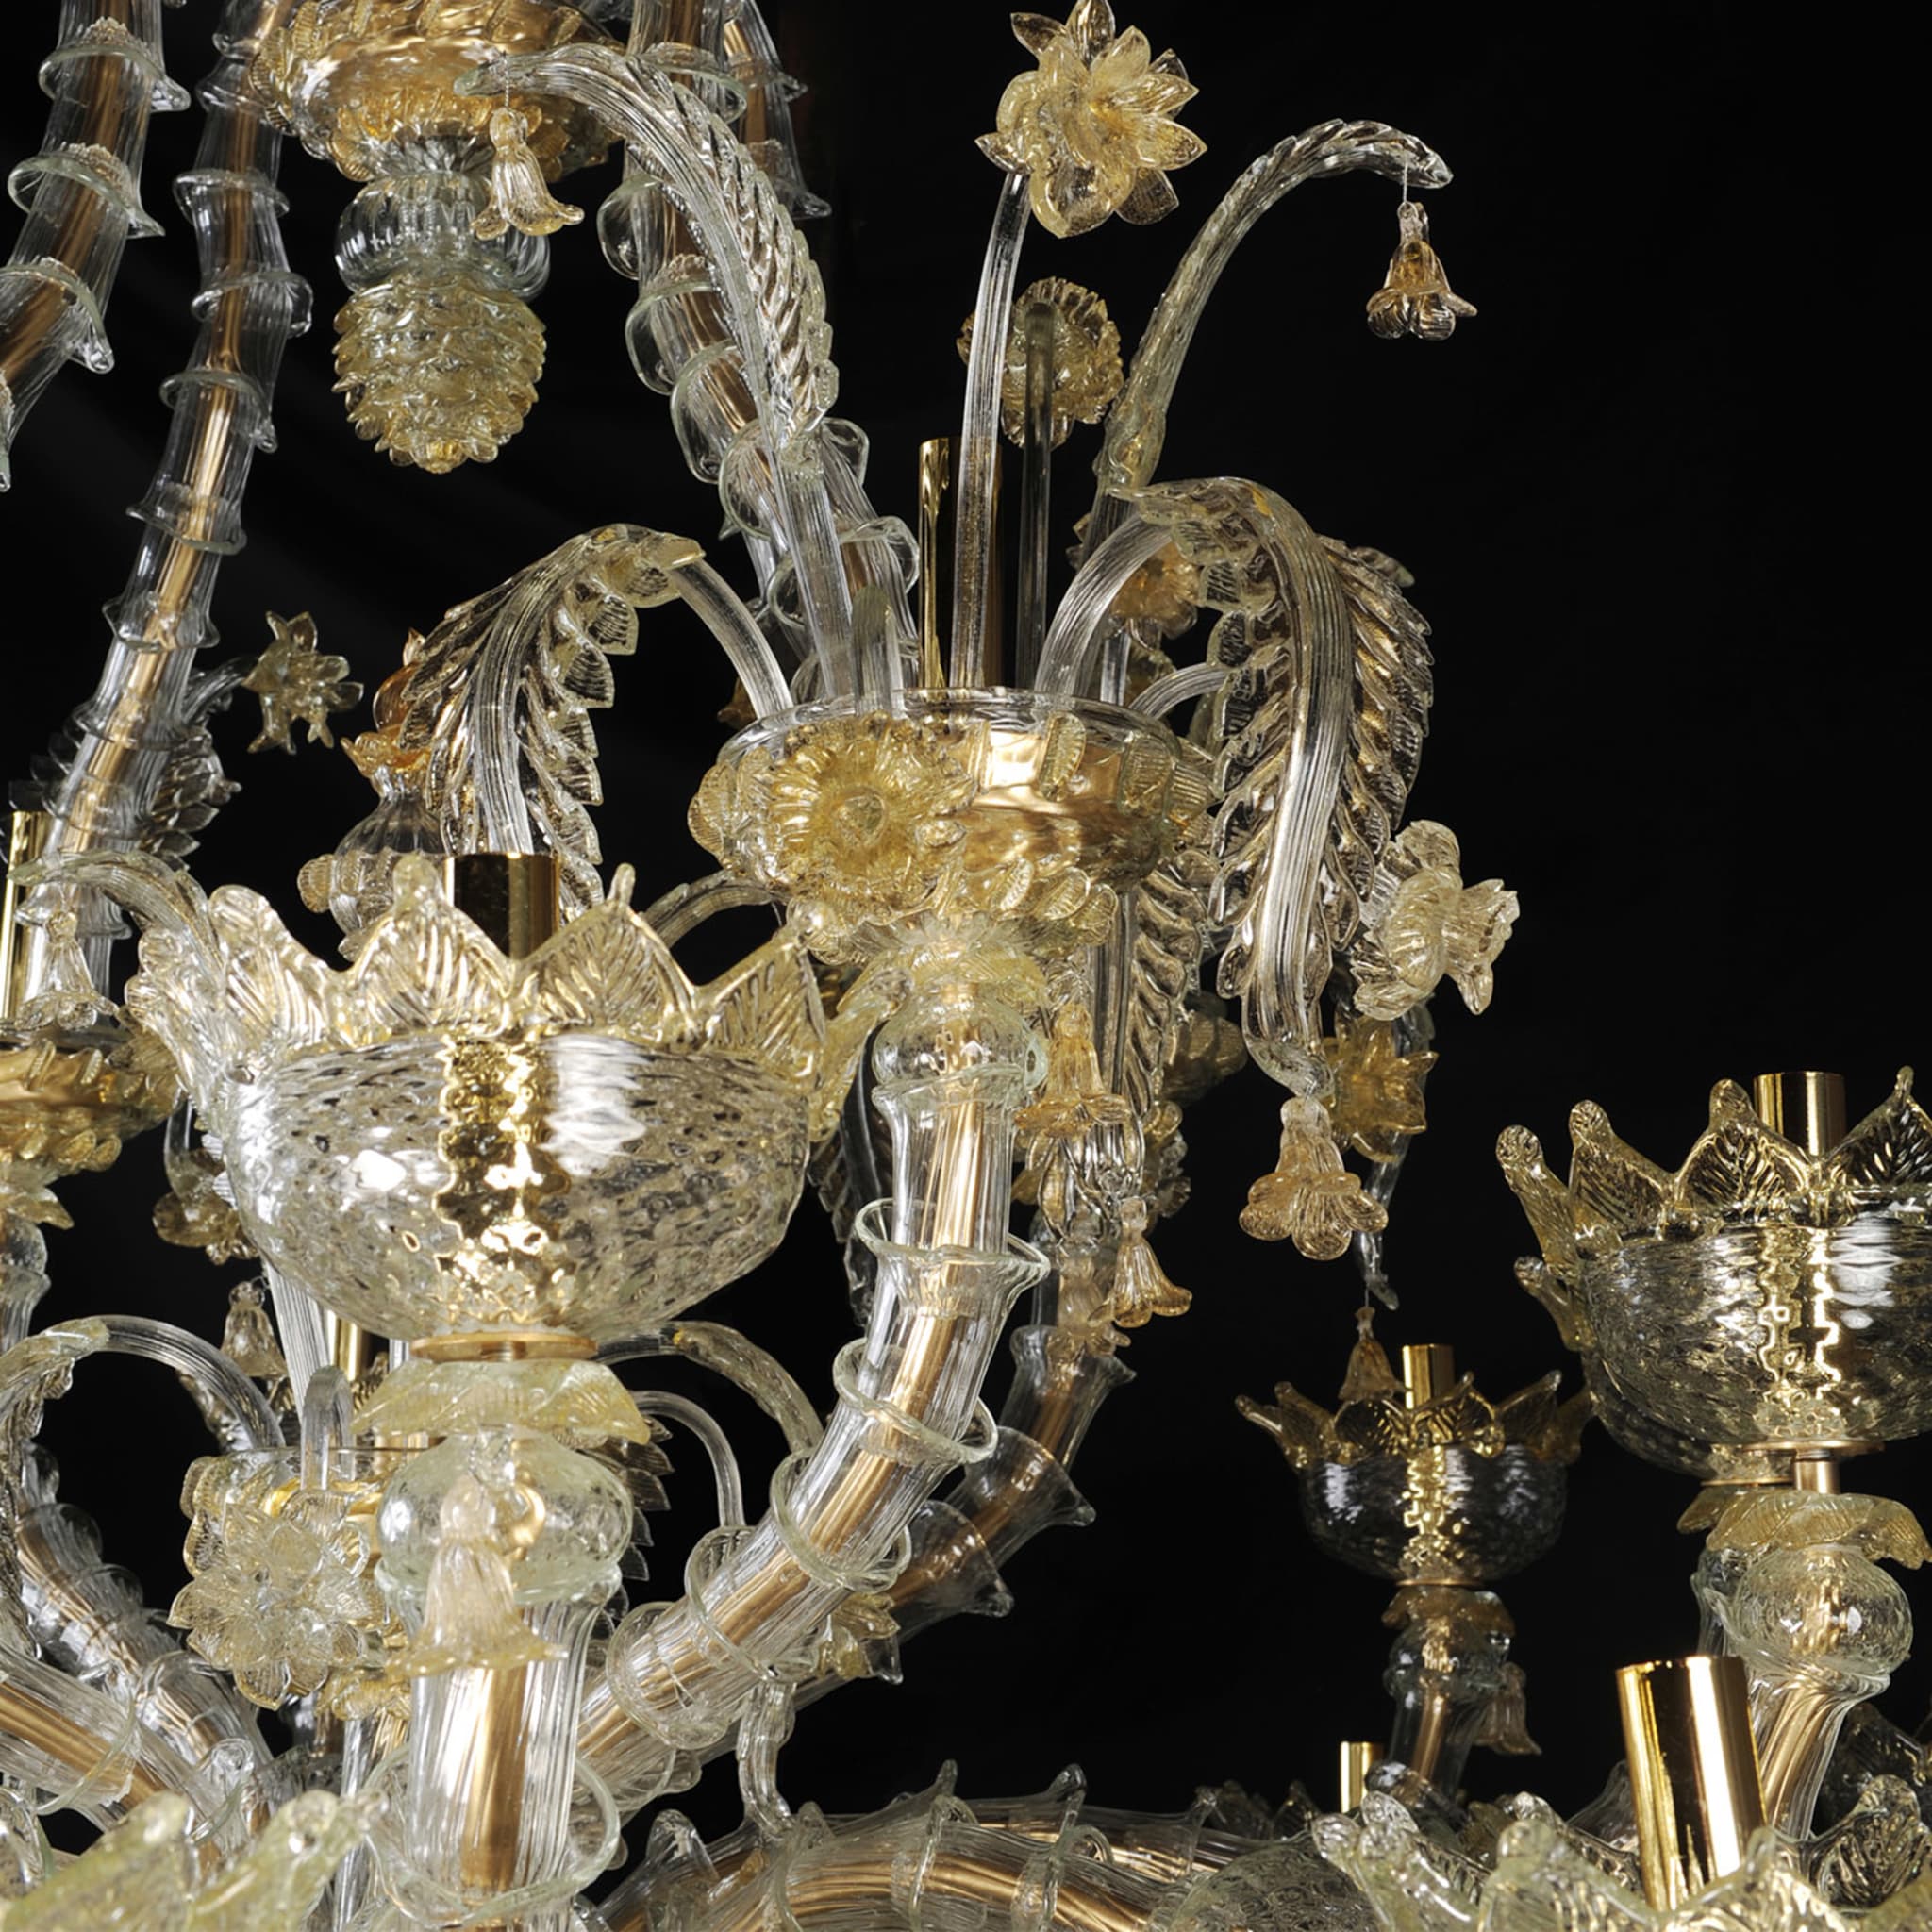 Rezzonico-style Gold and Crystal Chandelier #6 - Alternative view 5